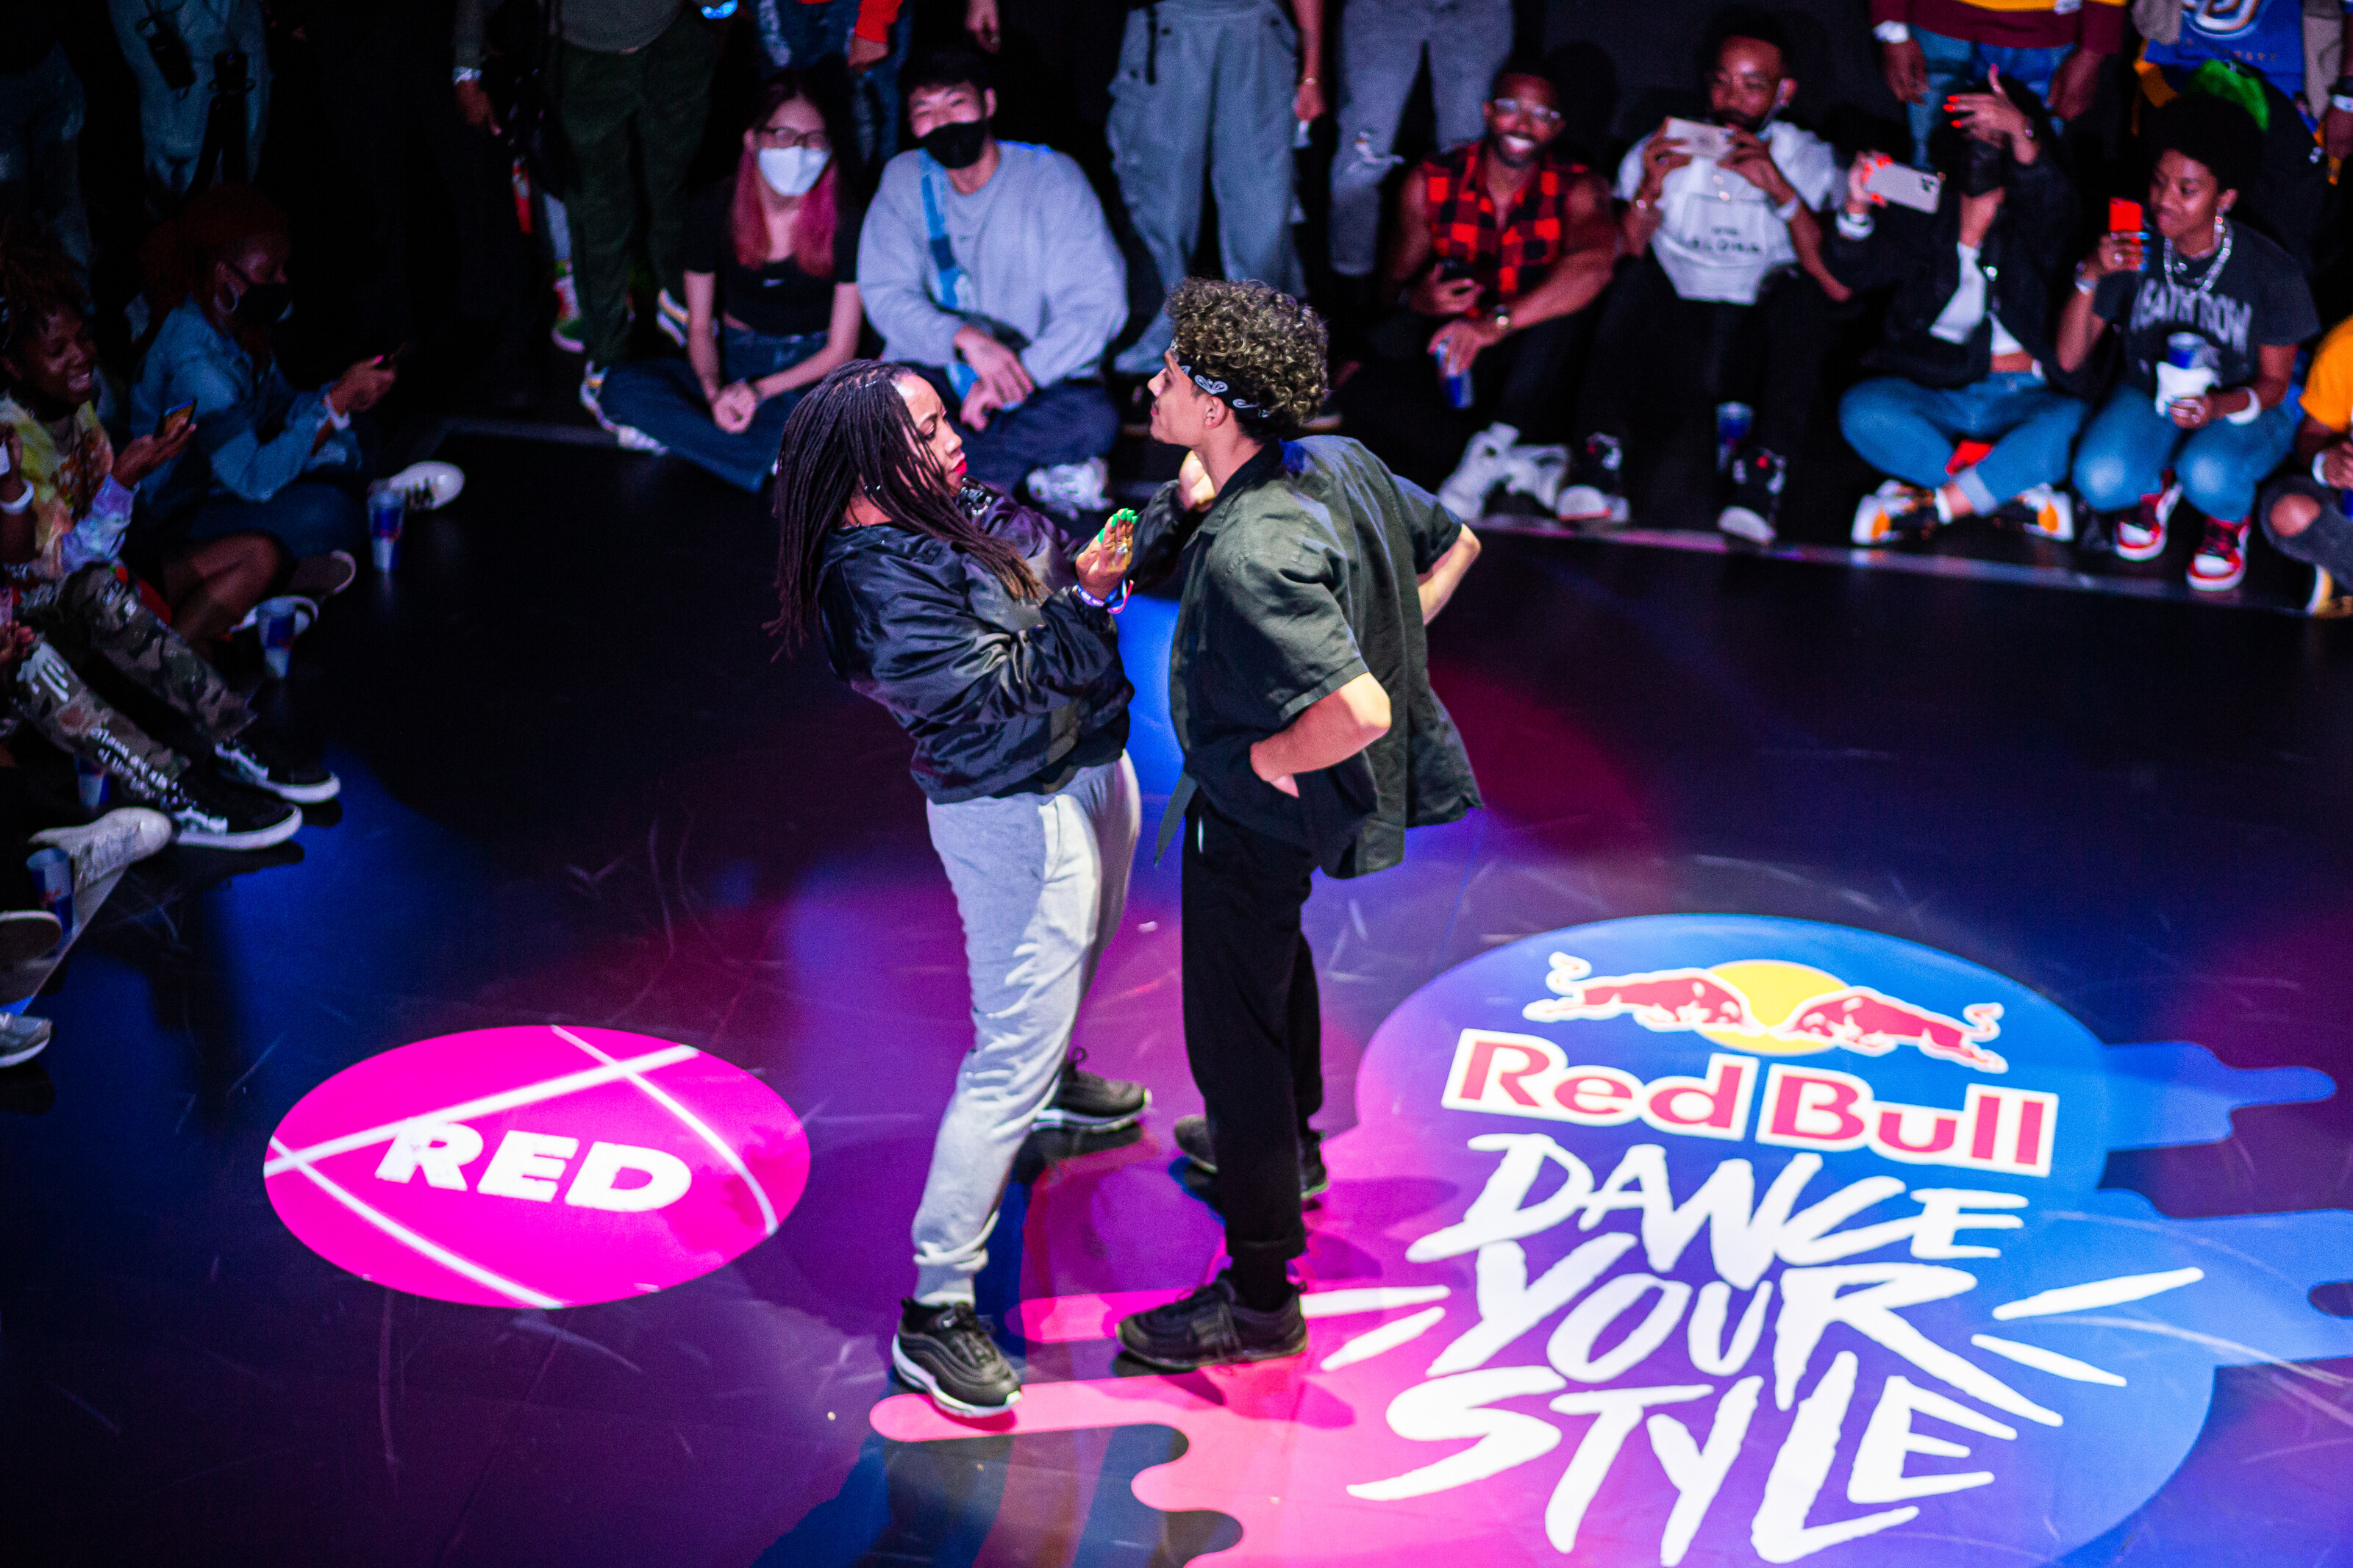 Red Bull Dance Your Style National Final Taking Place In New Orleans